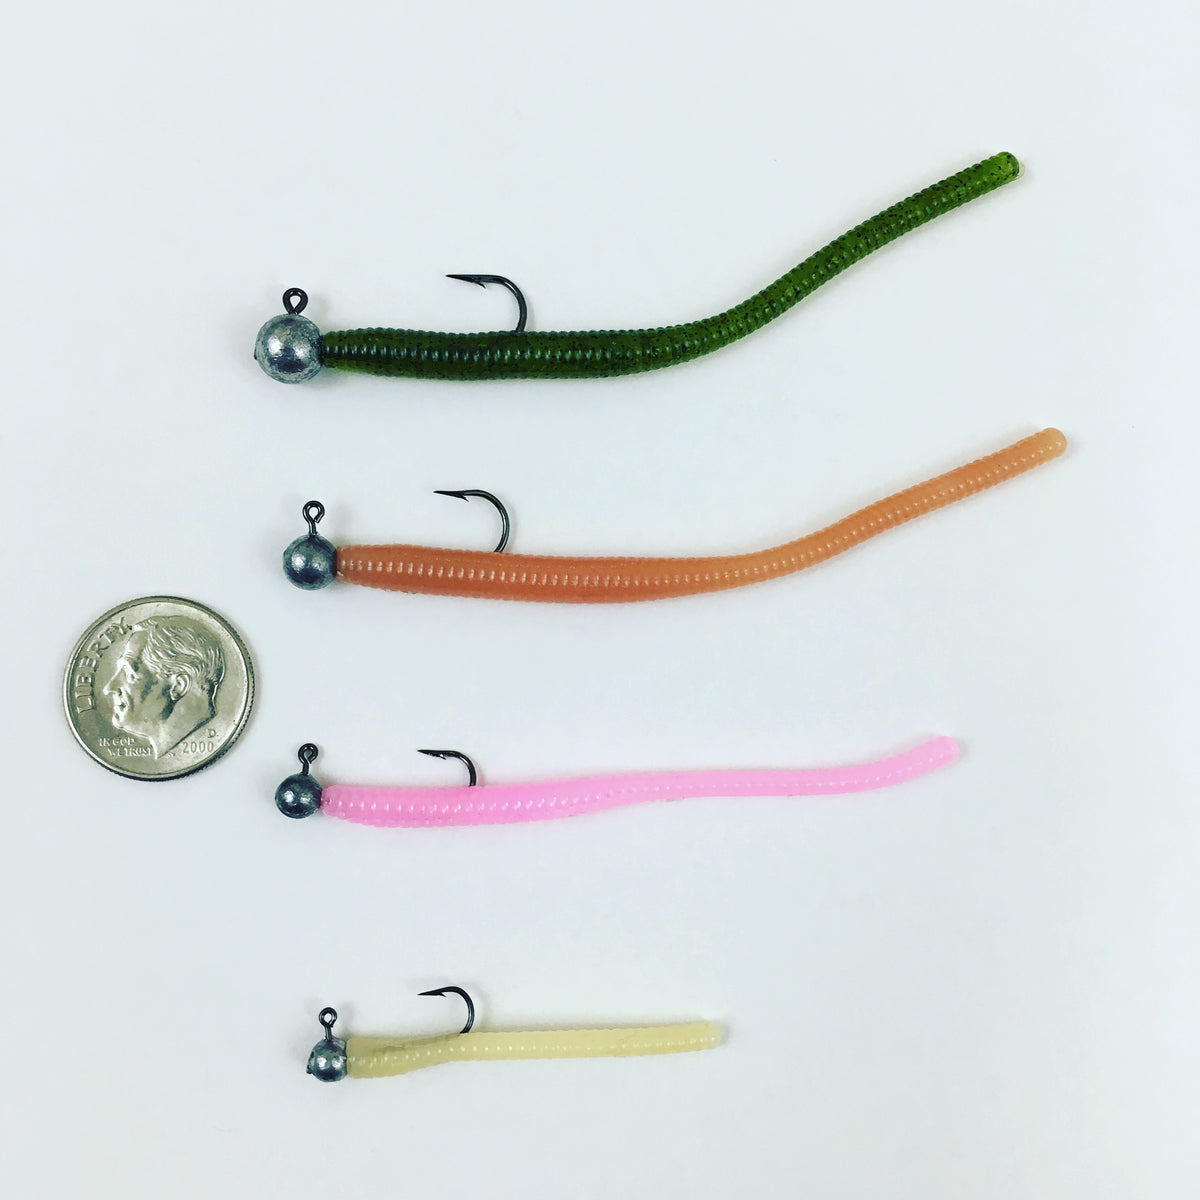 Trout Worm with Egg: Salmon Egg/Bubblegum Pink – Peter's Custom Trout Worms